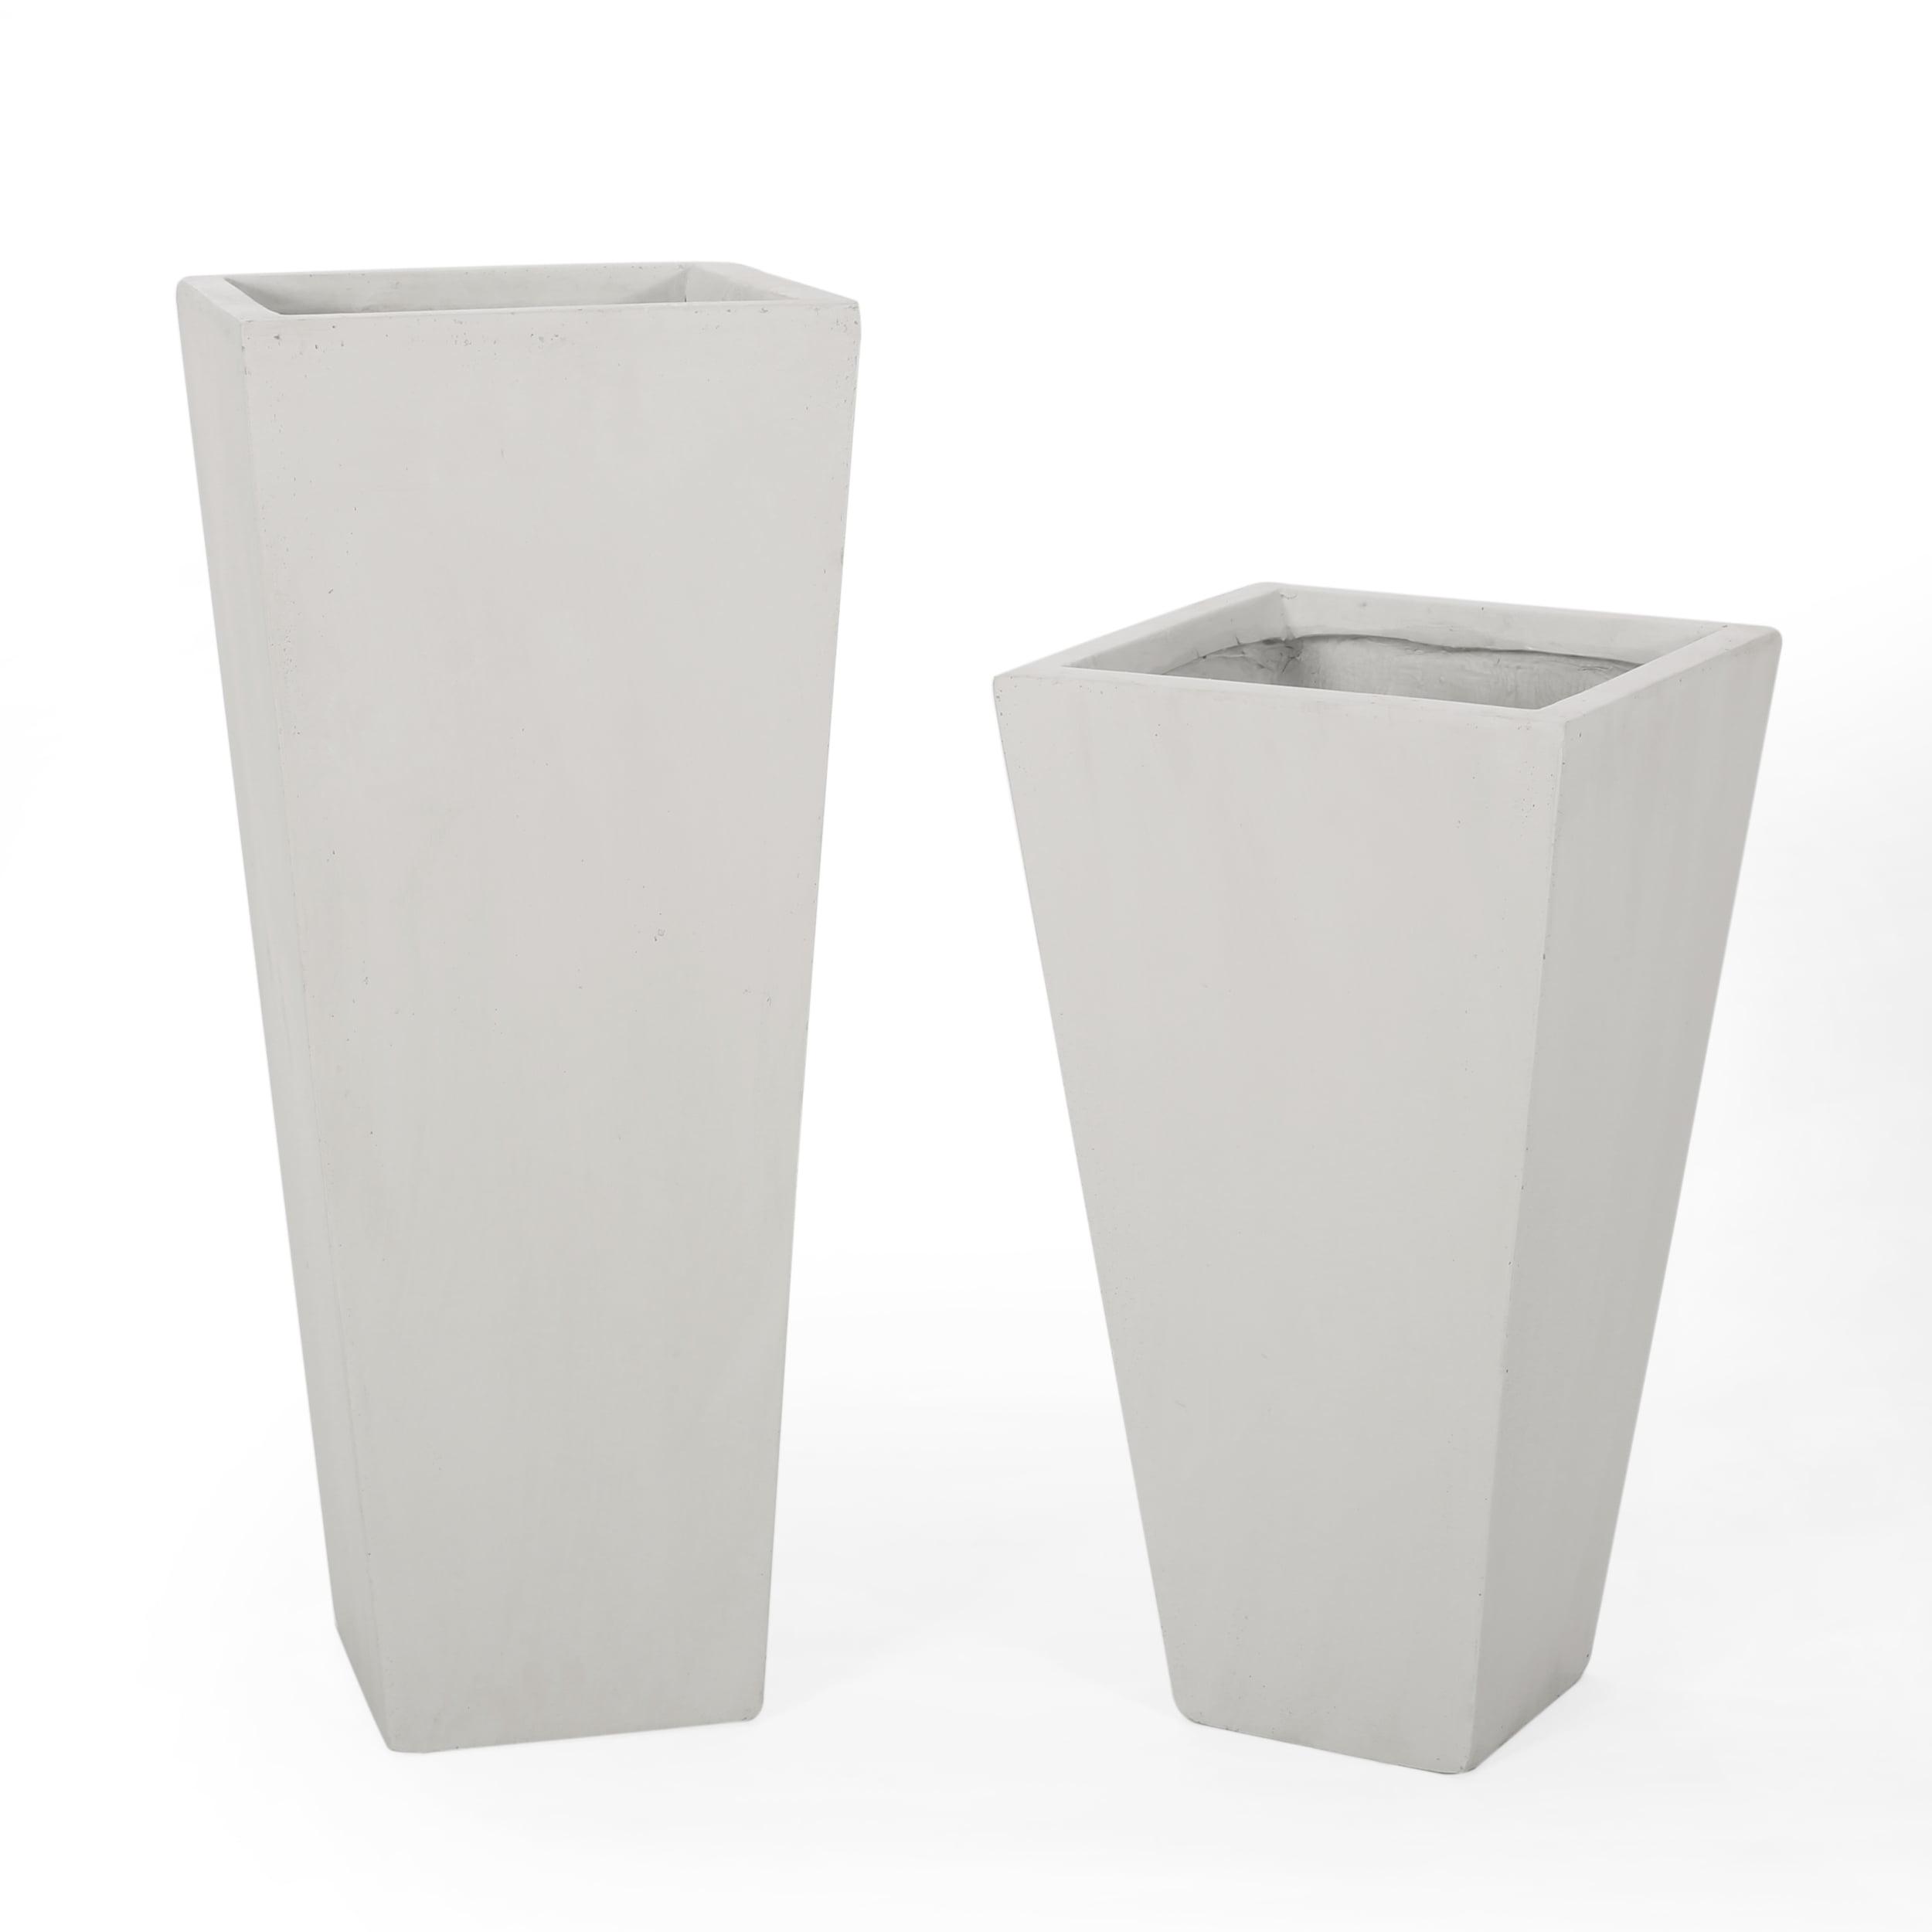 Matte White Cast Stone Tapered Outdoor Planter Set